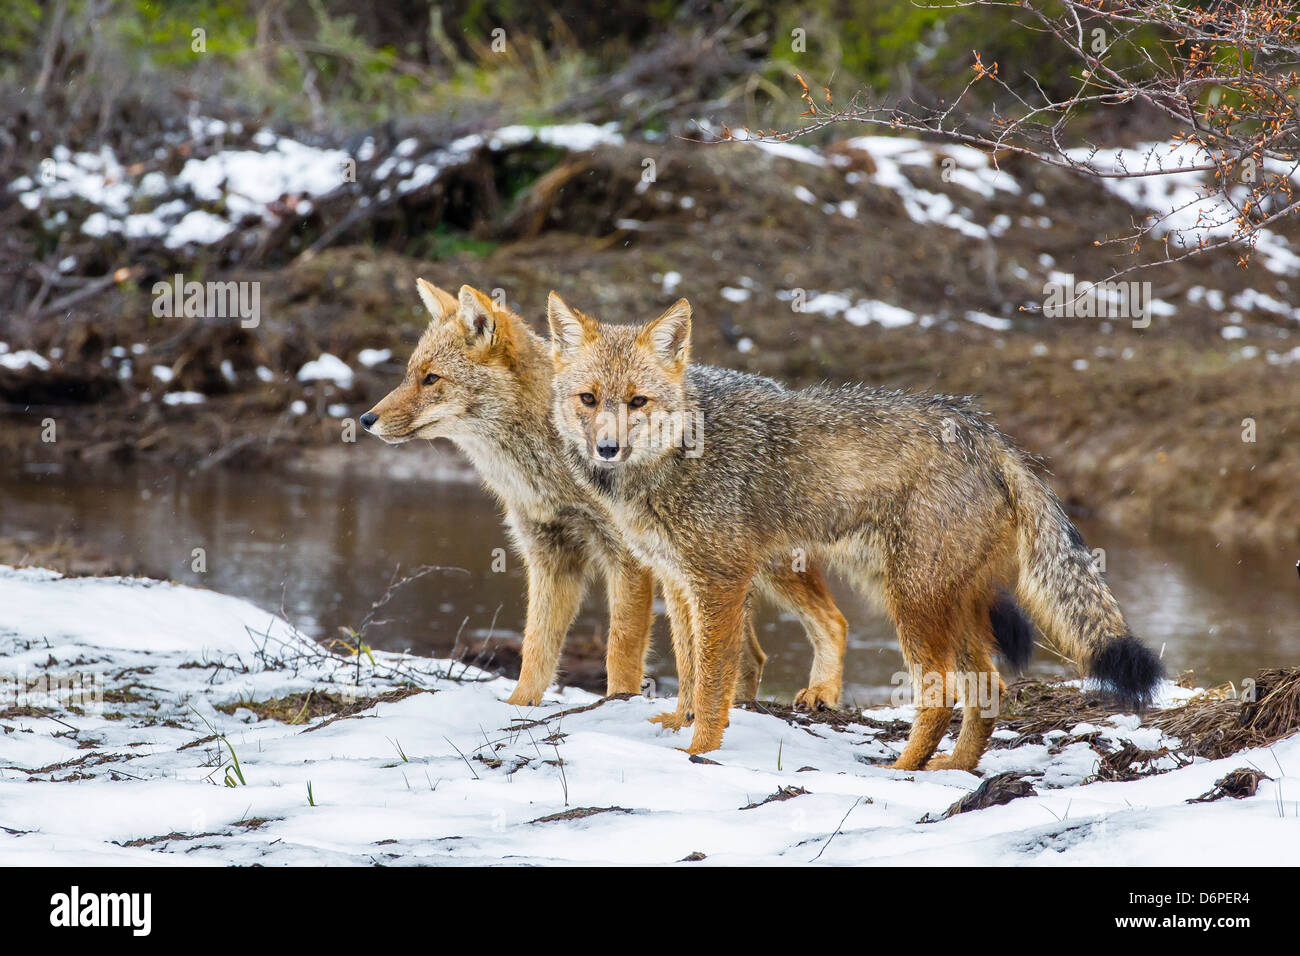 Adult Patagonian red fox (Lycalopex culpaeus) pair in La Pataya Bay, Beagle Channel, Argentina, South America Stock Photo